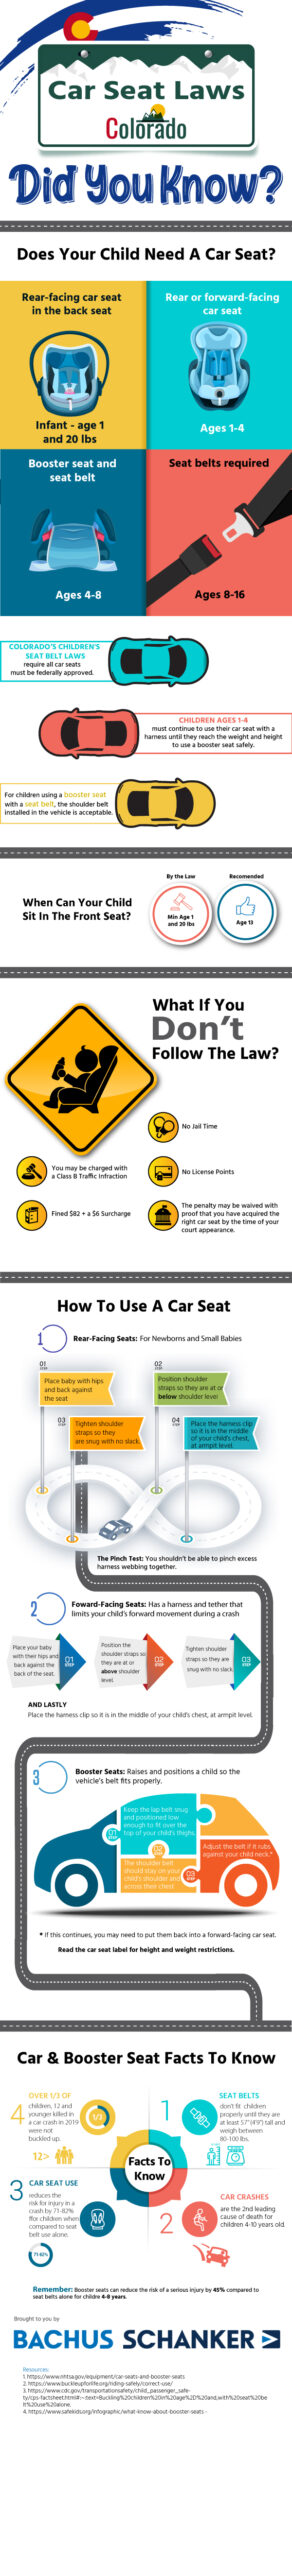 colorado child car seat laws infographic